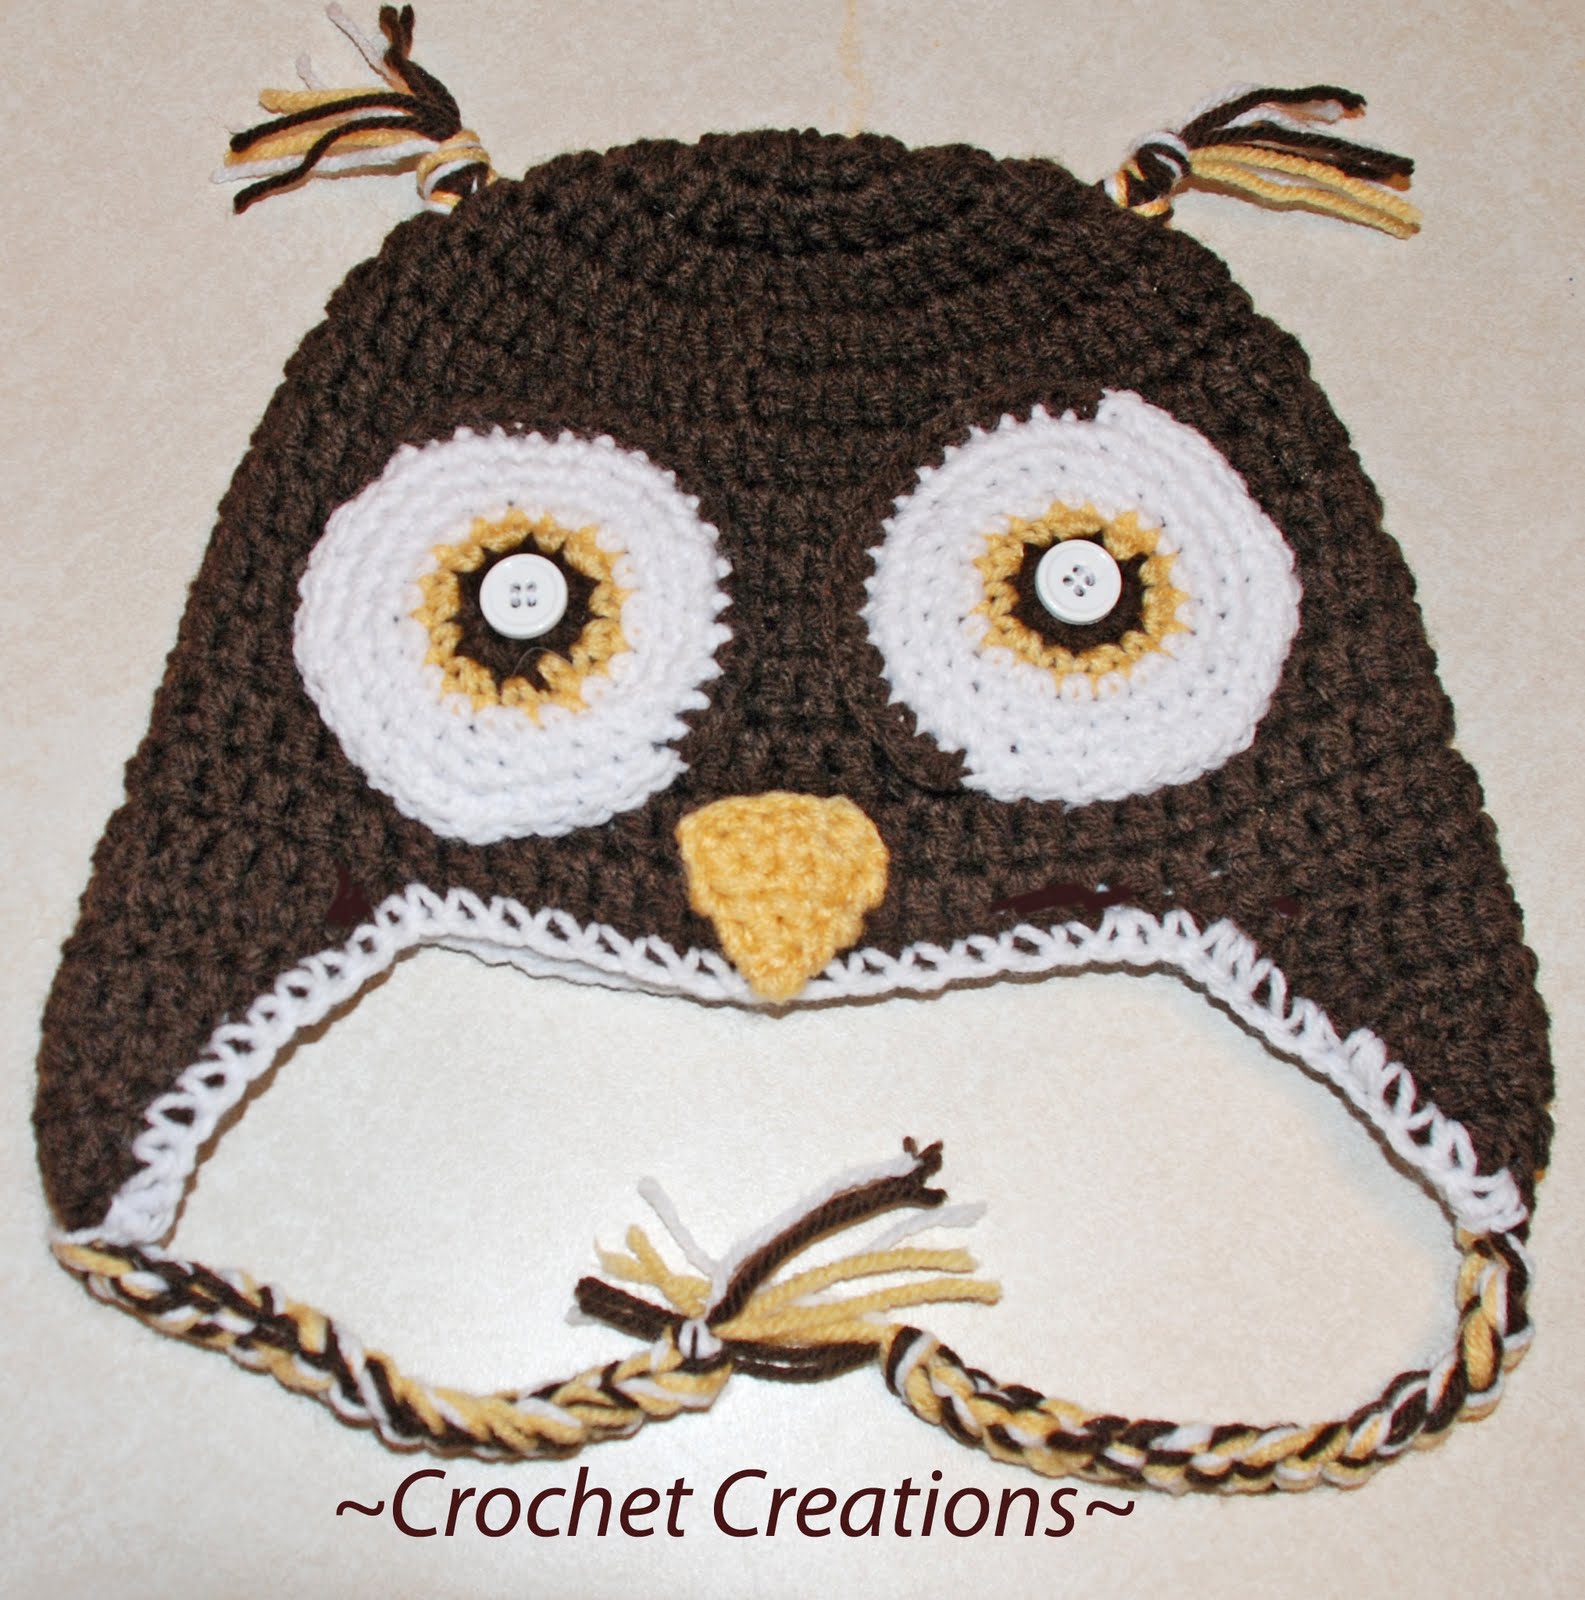 How to Make Crochet Hats with Free Crochet Hat Patterns